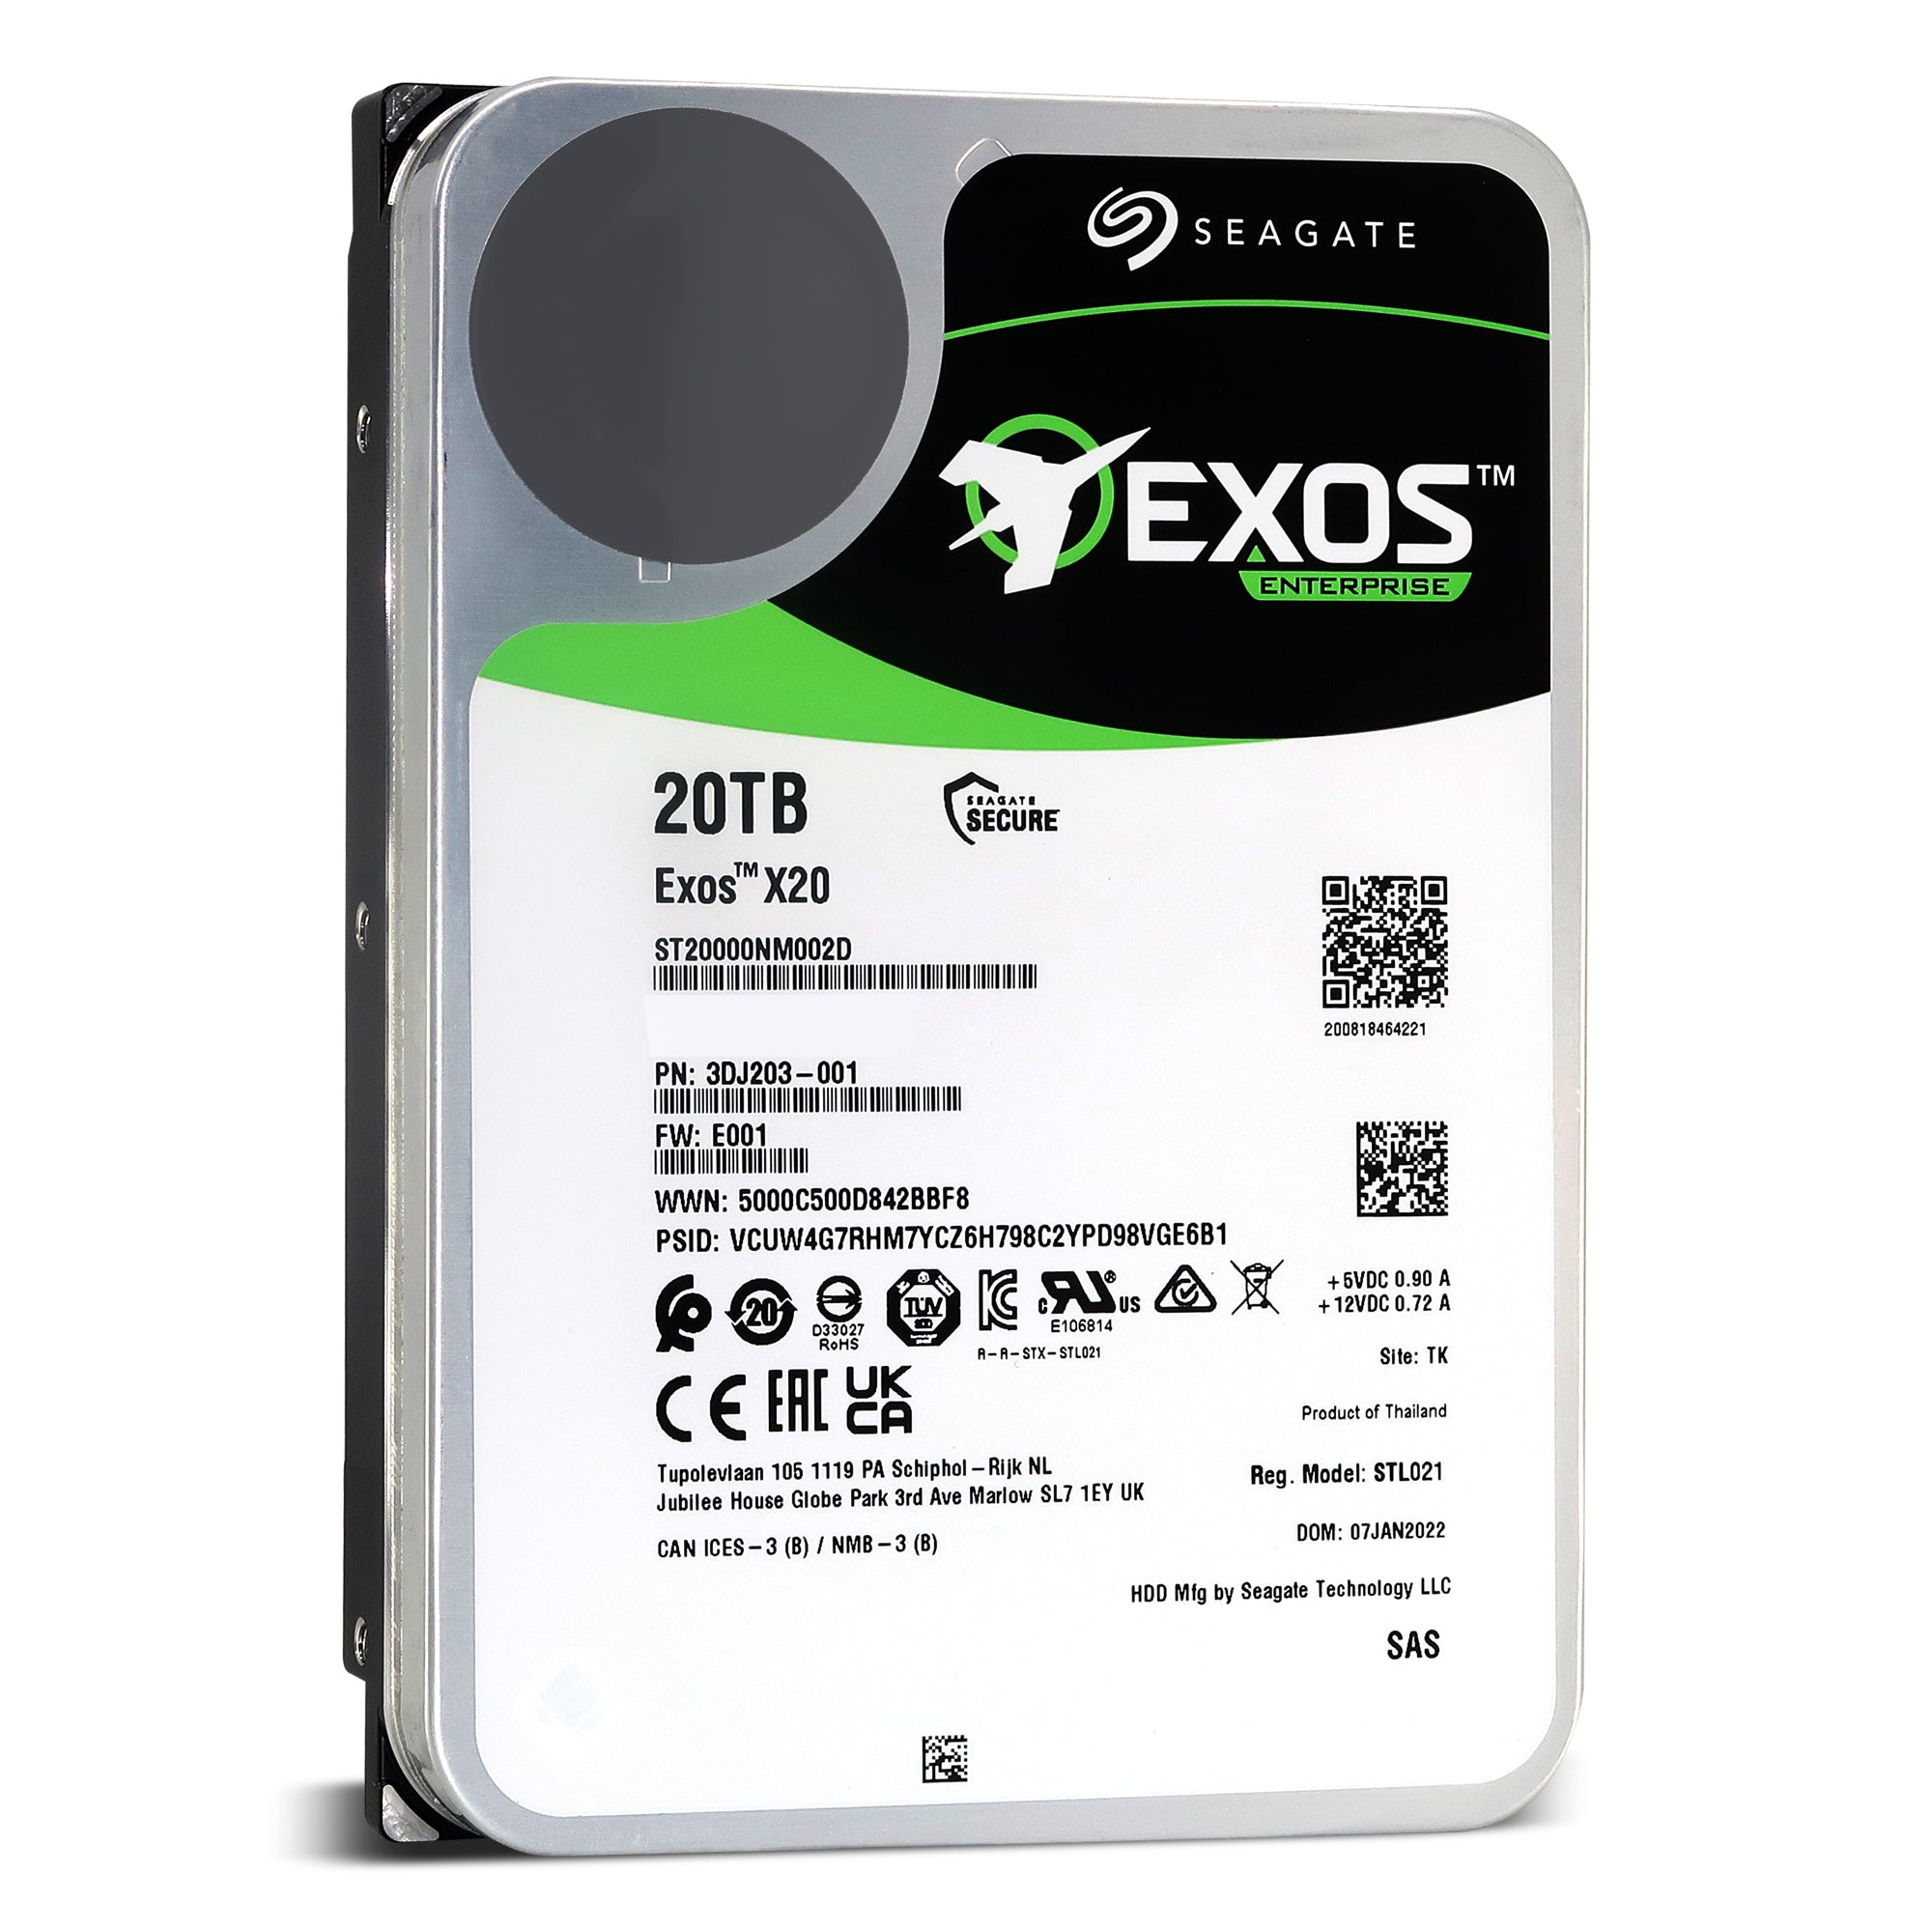 Seagate Exos X20 ST20000NM002D 20TB 7.2K RPM SAS 12Gb/s 3.5in Hard Drive - Front View